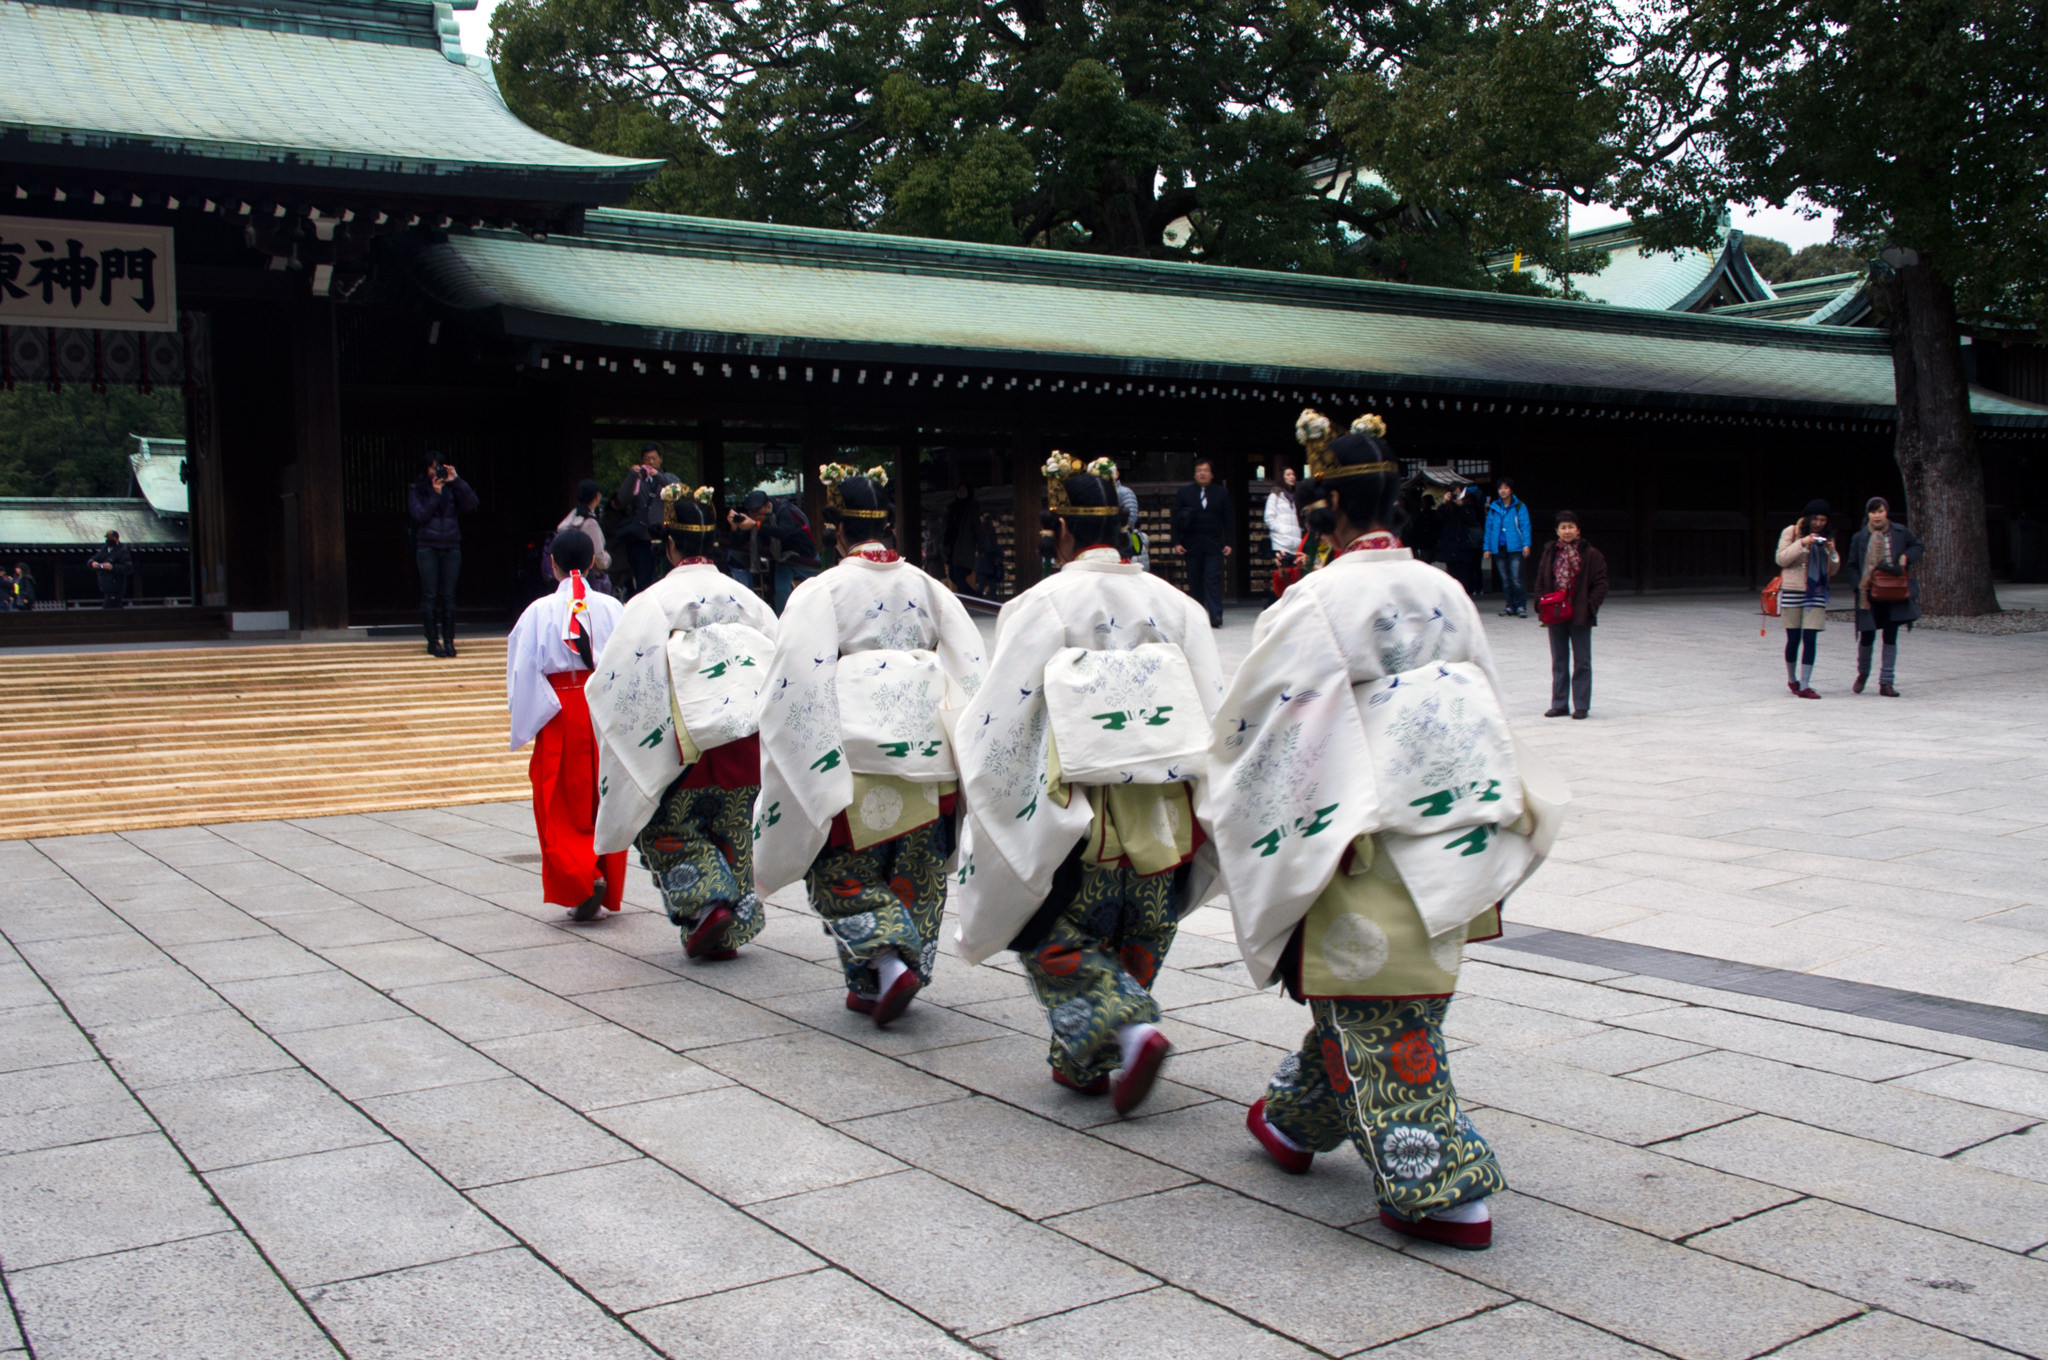 Members of a wedding procession at the Meiji Shrine in Tokyo. Photo by alphacityguides.